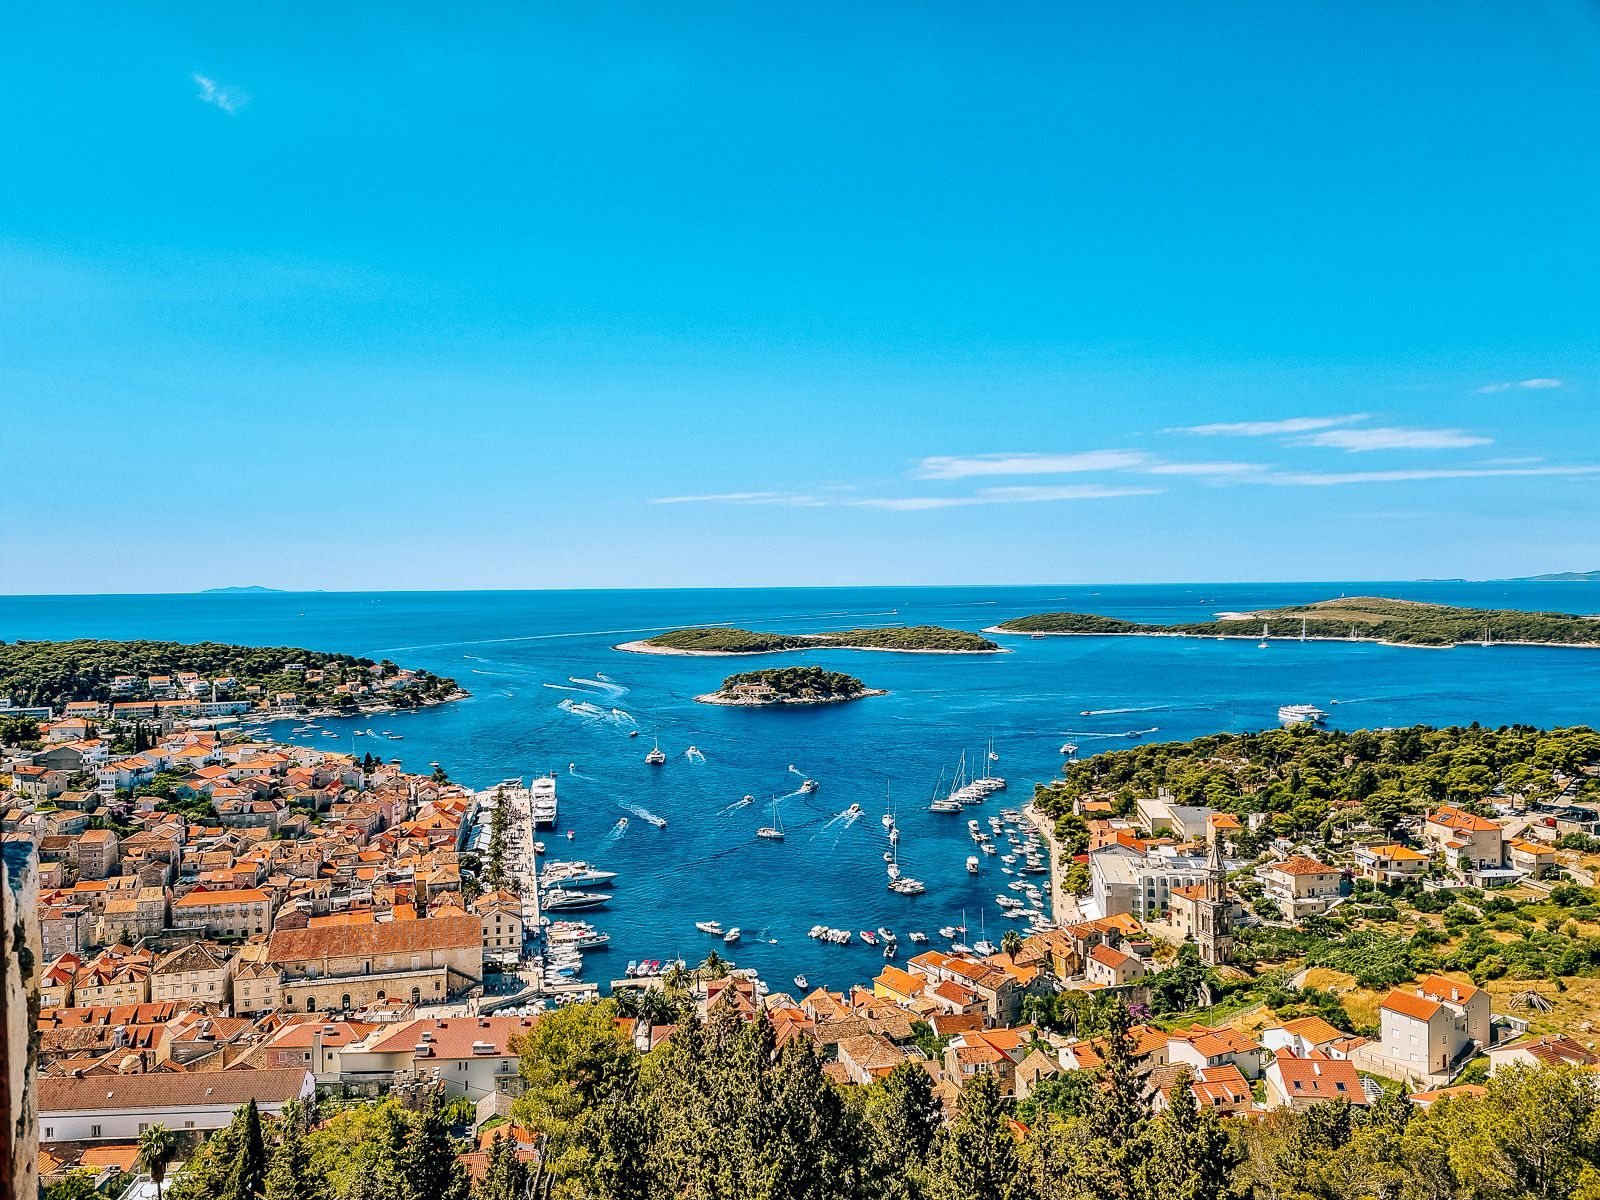 view from the fortress of Hvar Town below with the harbour and many boats sailing in and out. The sea is blue and there are green islands in the distance